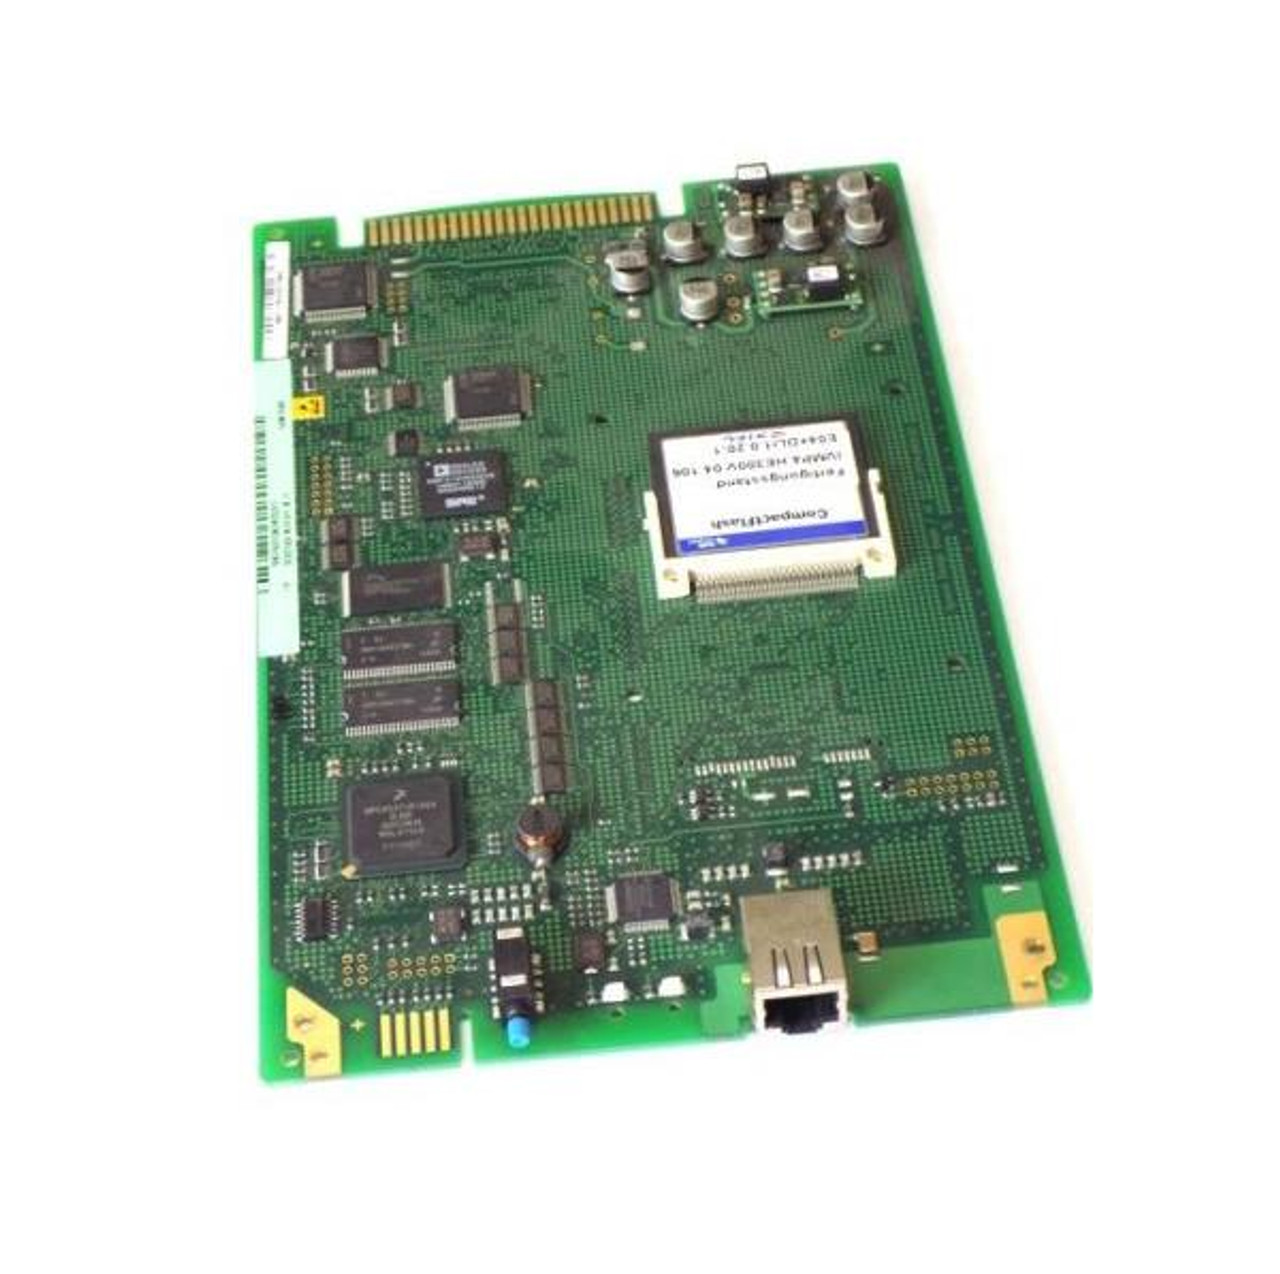 S30122-K7721-X Siemens IVMP4R (Integrated Voice Mail Point Rack) for HiPath 3500 and Hi-Path 3300